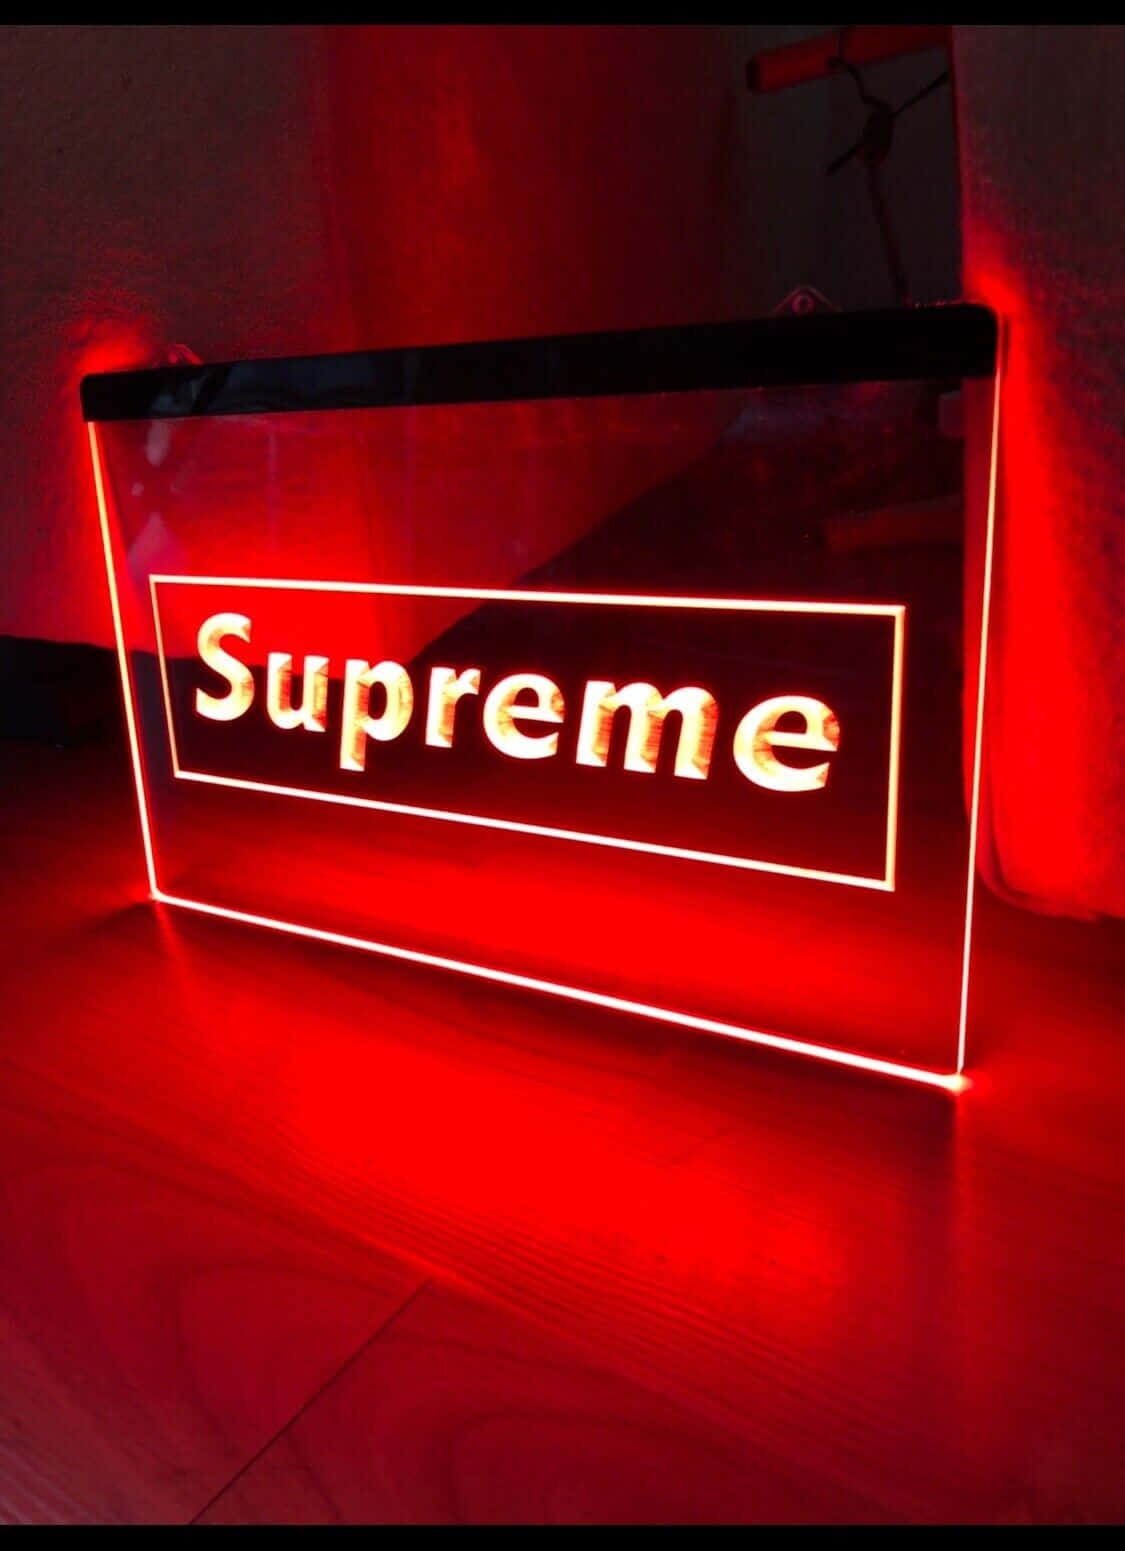 Supreme- the brand that represents youth culture.